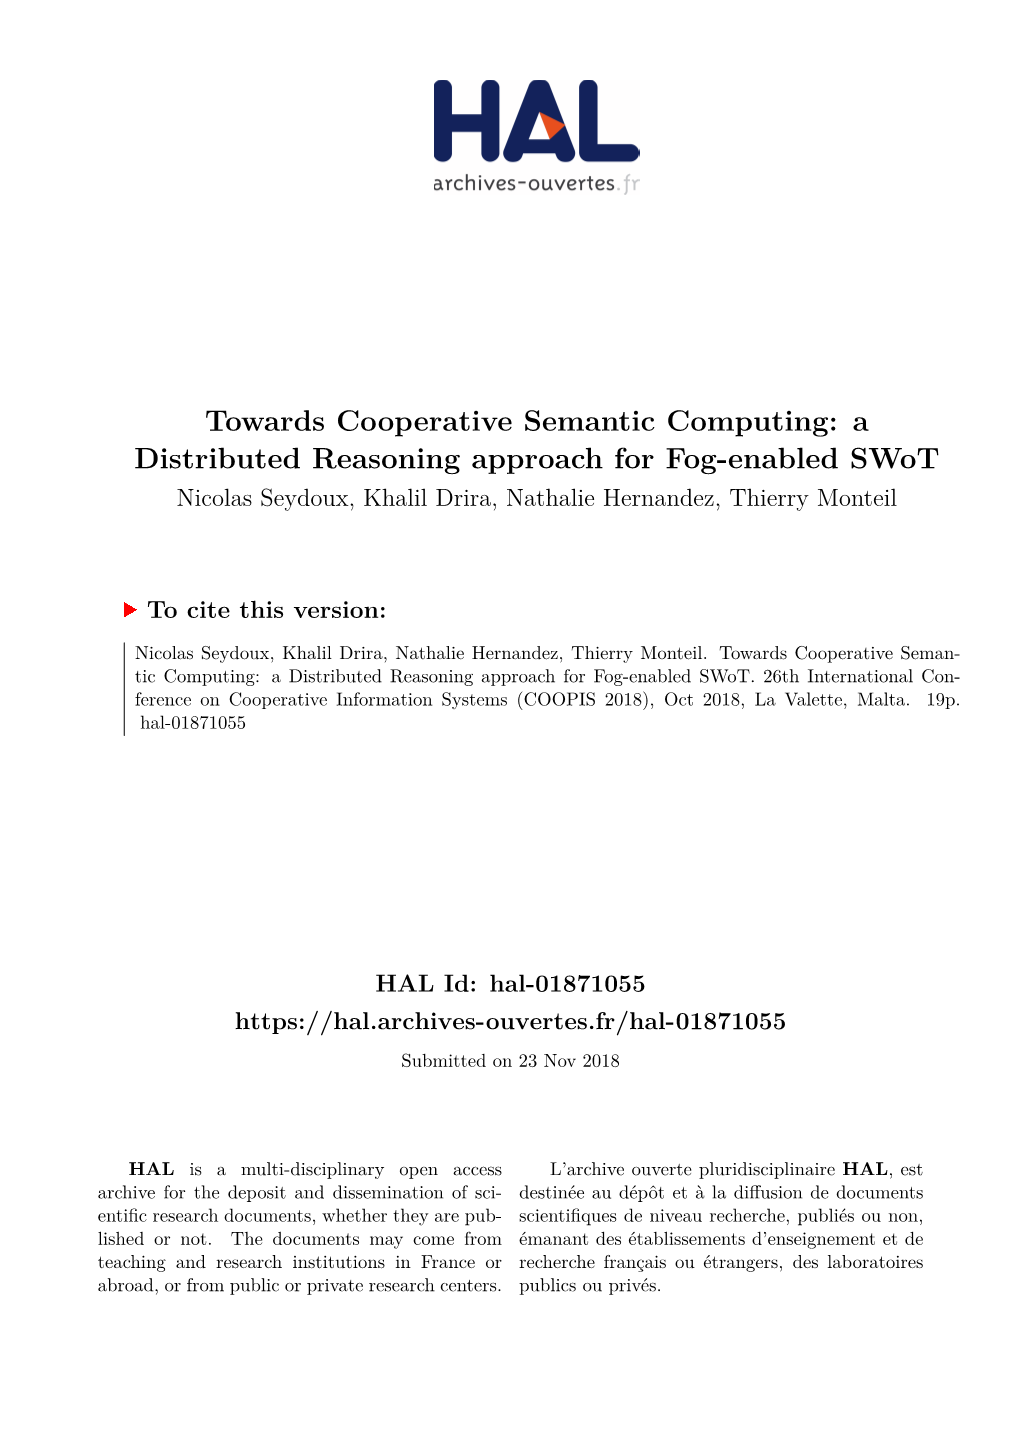 Towards Cooperative Semantic Computing: a Distributed Reasoning Approach for Fog-Enabled Swot Nicolas Seydoux, Khalil Drira, Nathalie Hernandez, Thierry Monteil